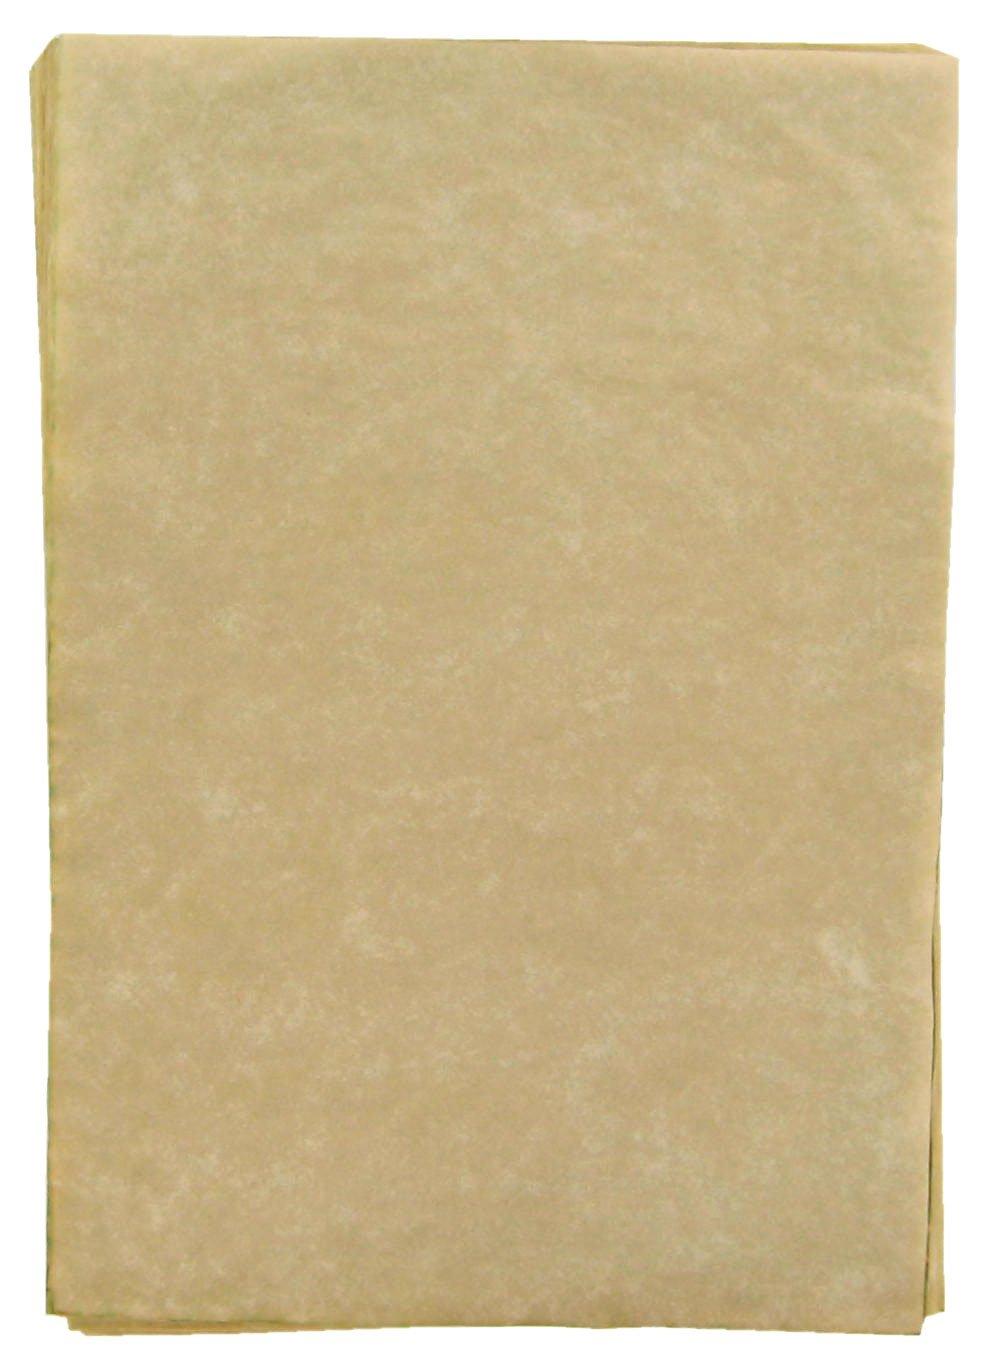 Antiqued Parchment Paper, Hobby Lobby